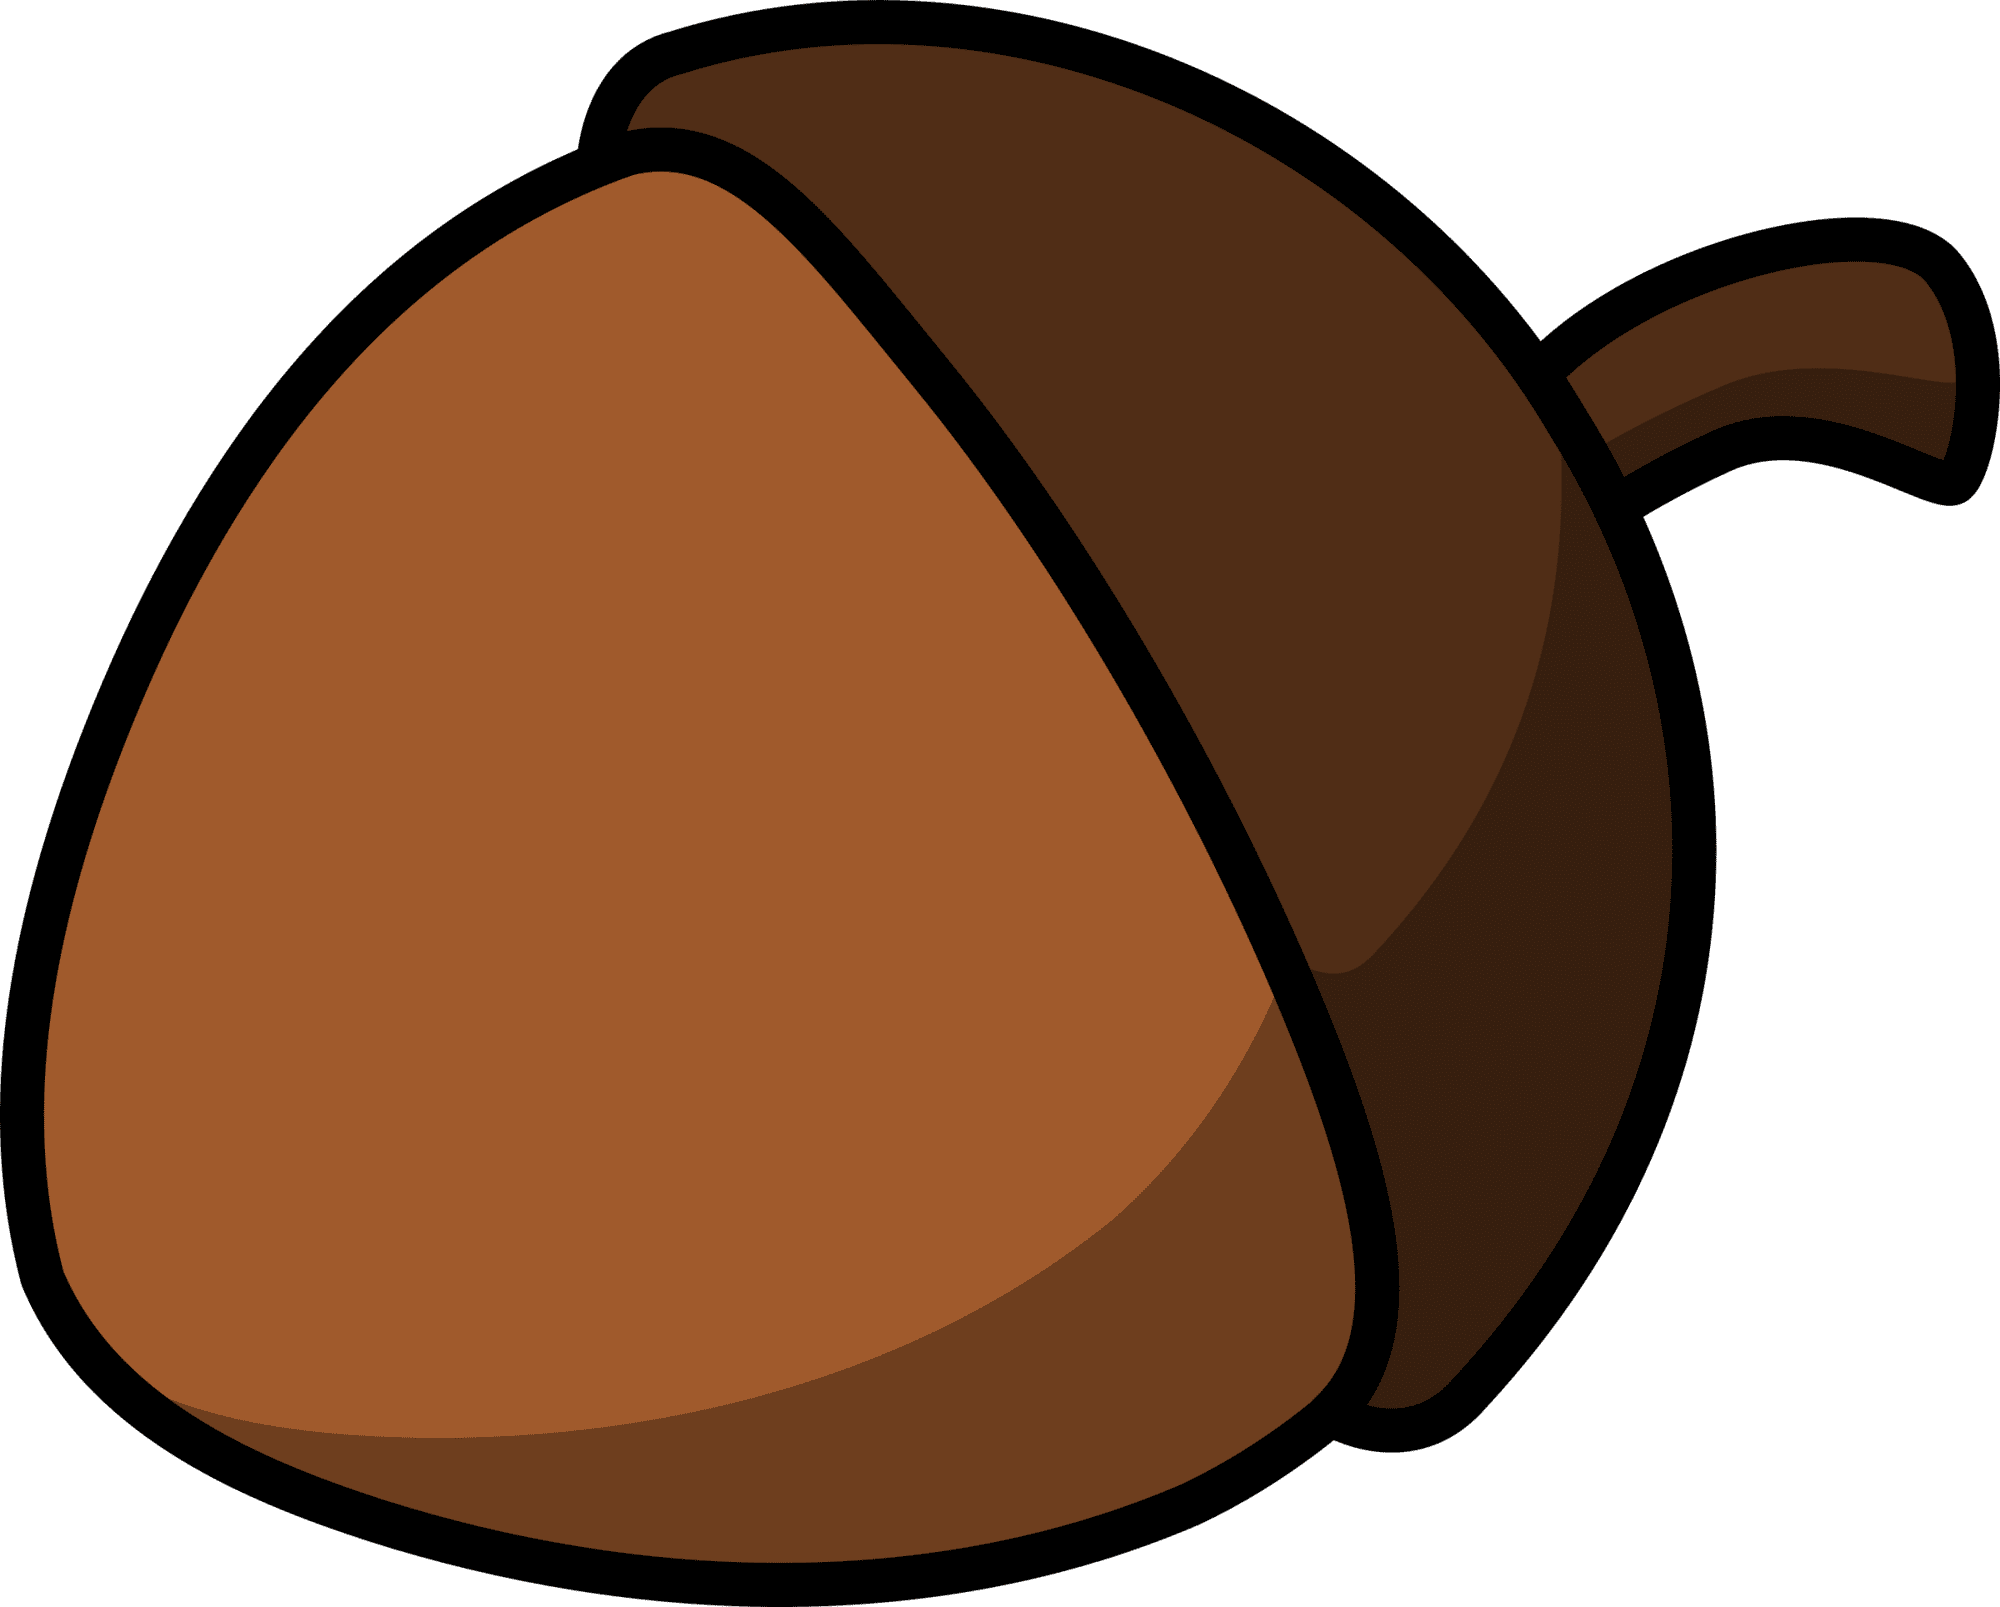 Cartoon acorn by lemmling clipart fall image